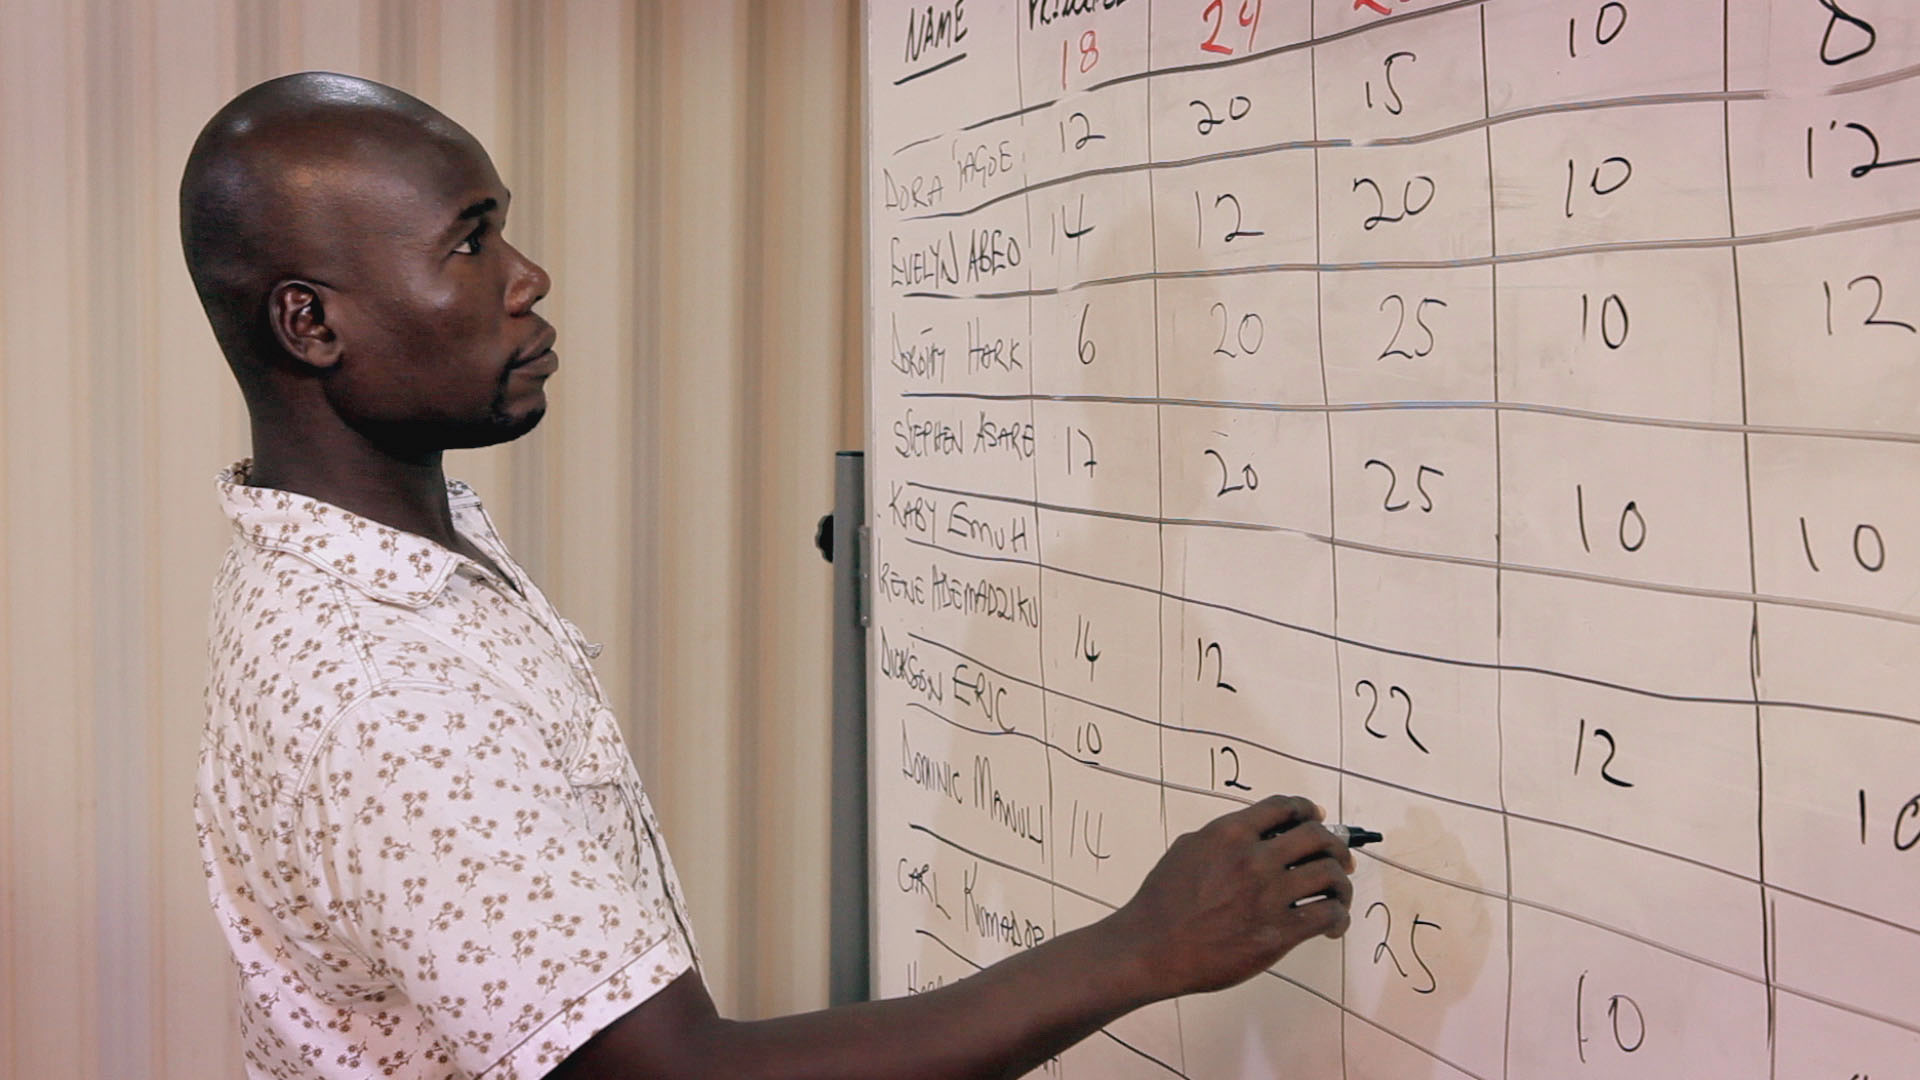 A man standing in front of a white board while writing numbers on it.